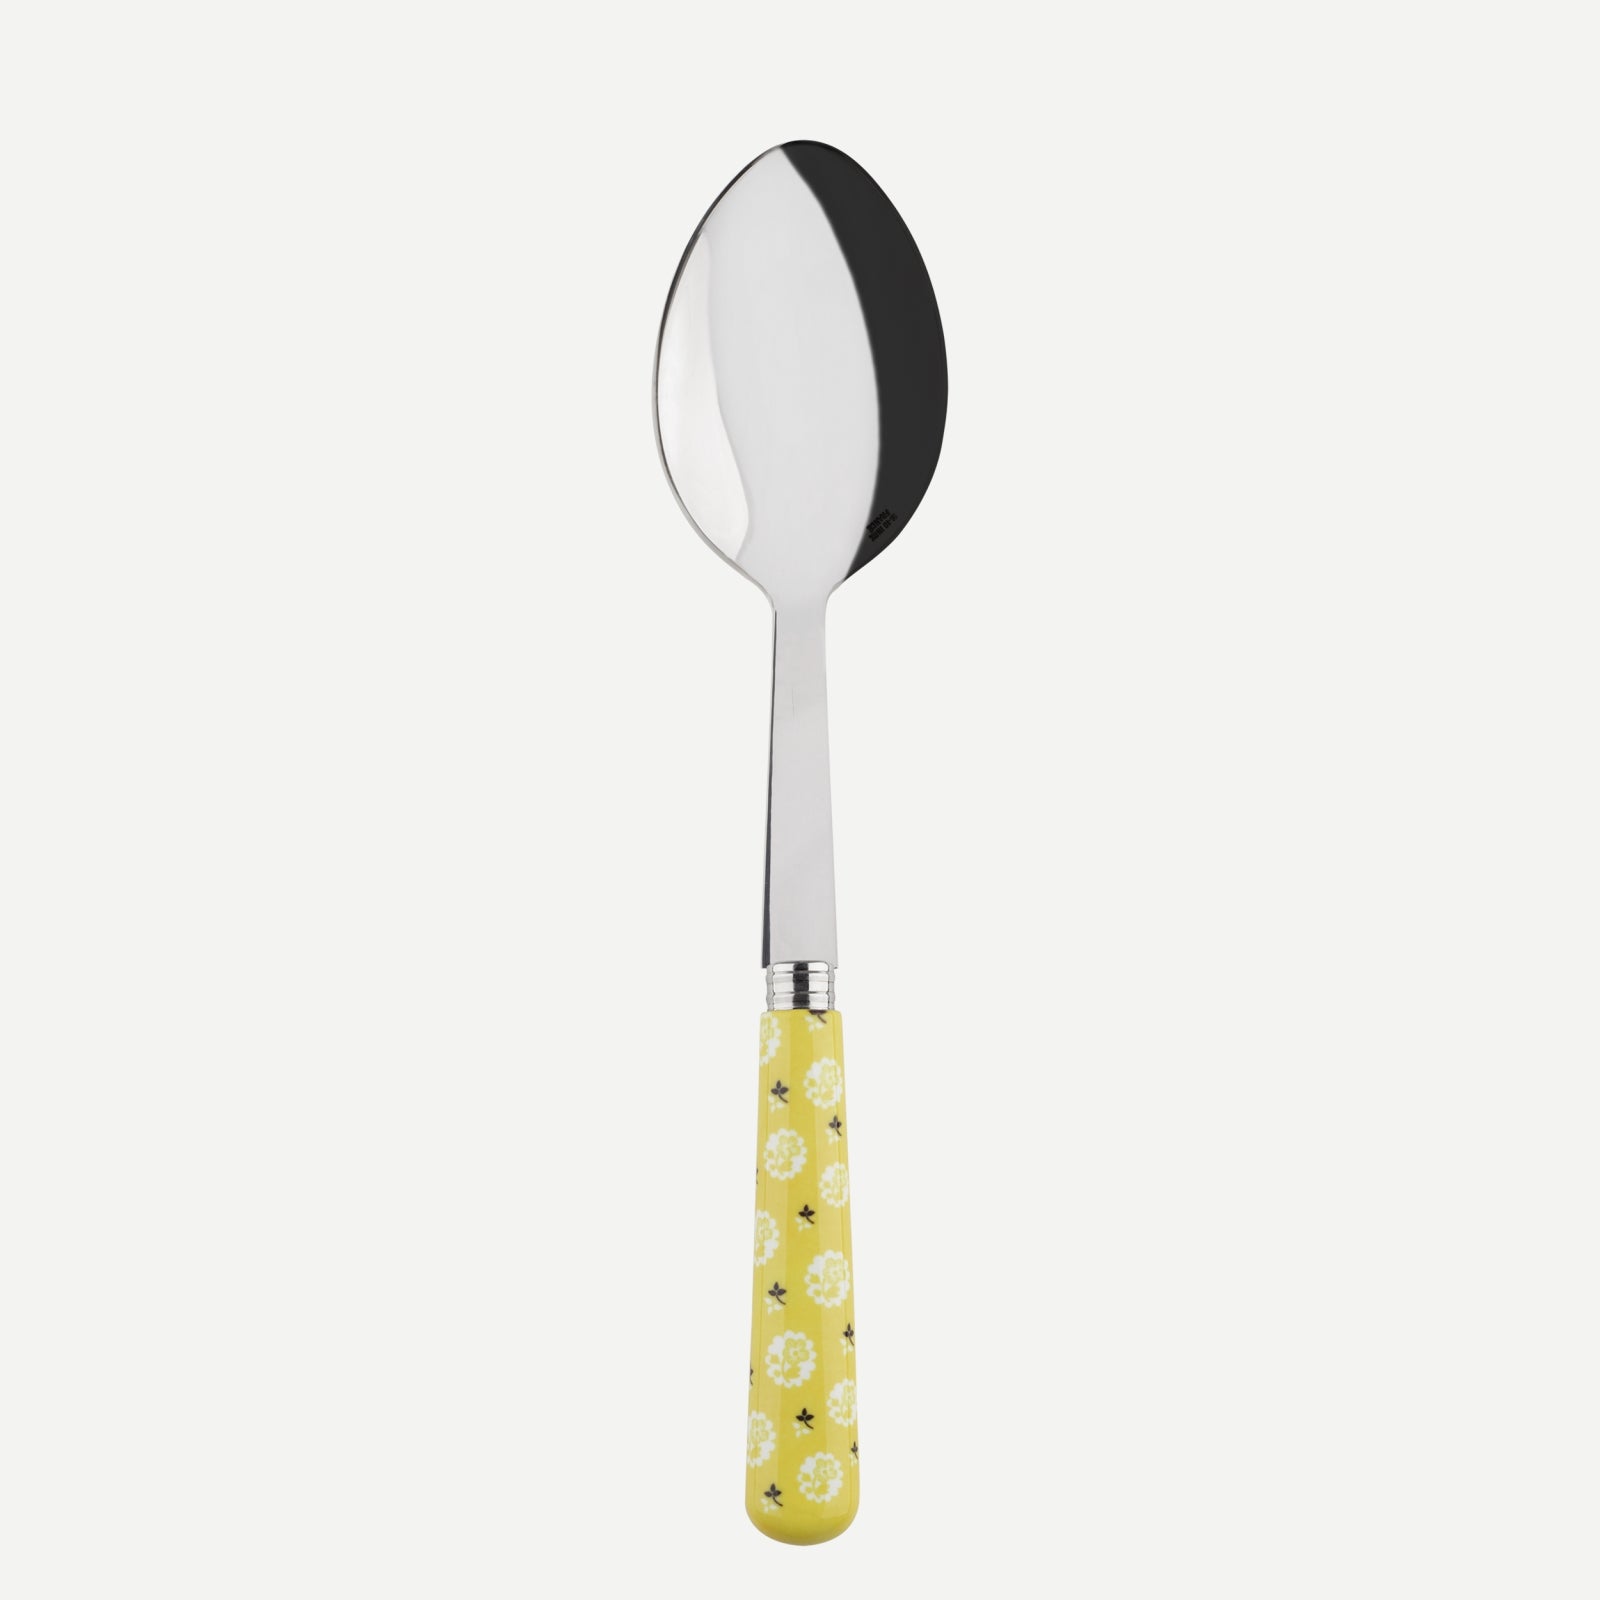 Serving spoon - Provencal - Yellow